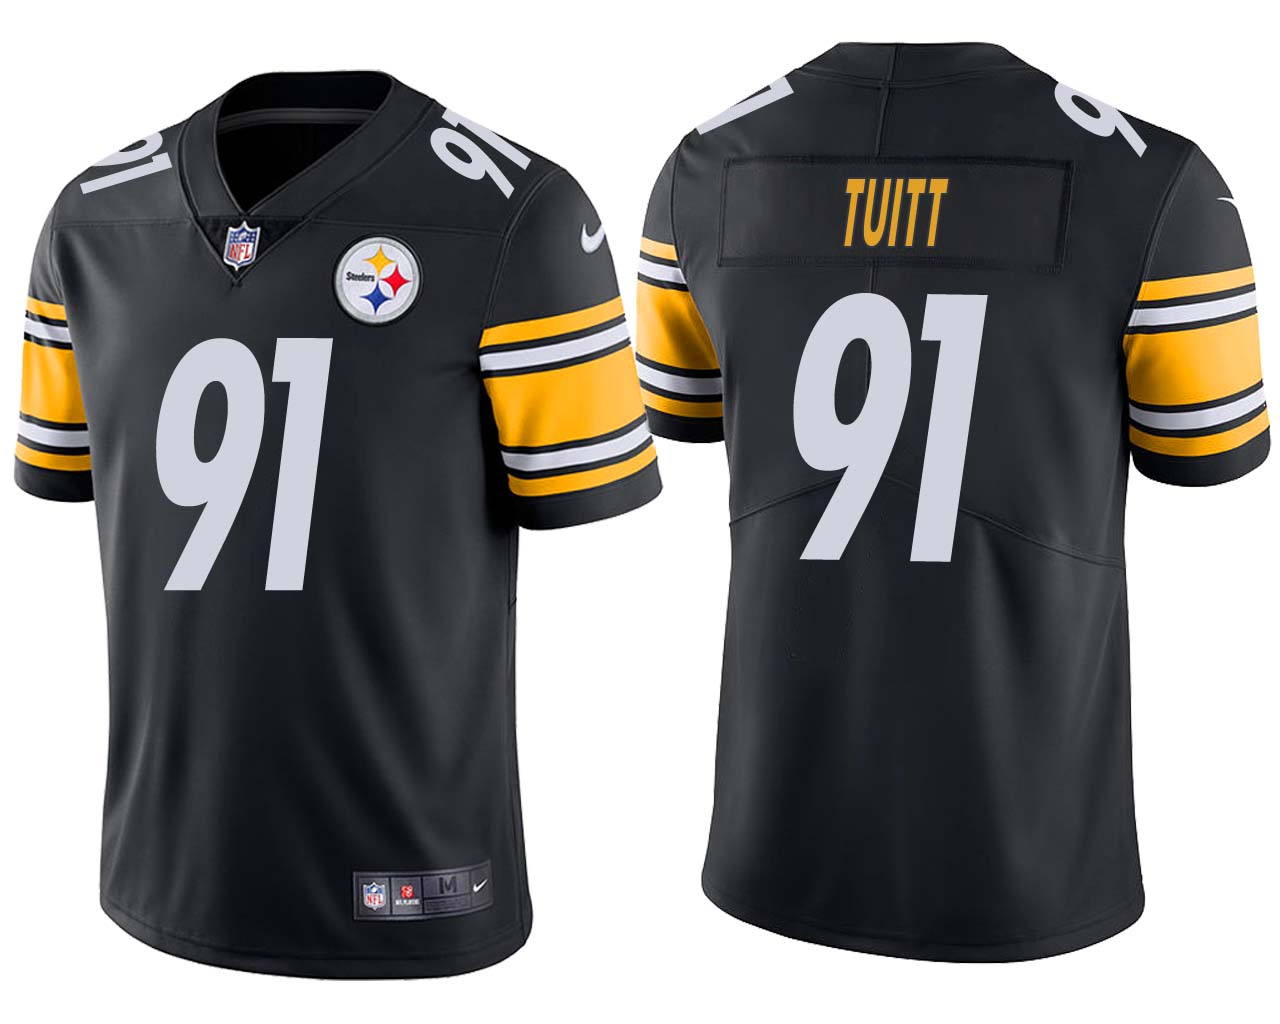 Pittsburgh Steelers Black #91 Stephon Tuitt Vapor Untouchable Limited Stitched Jersey